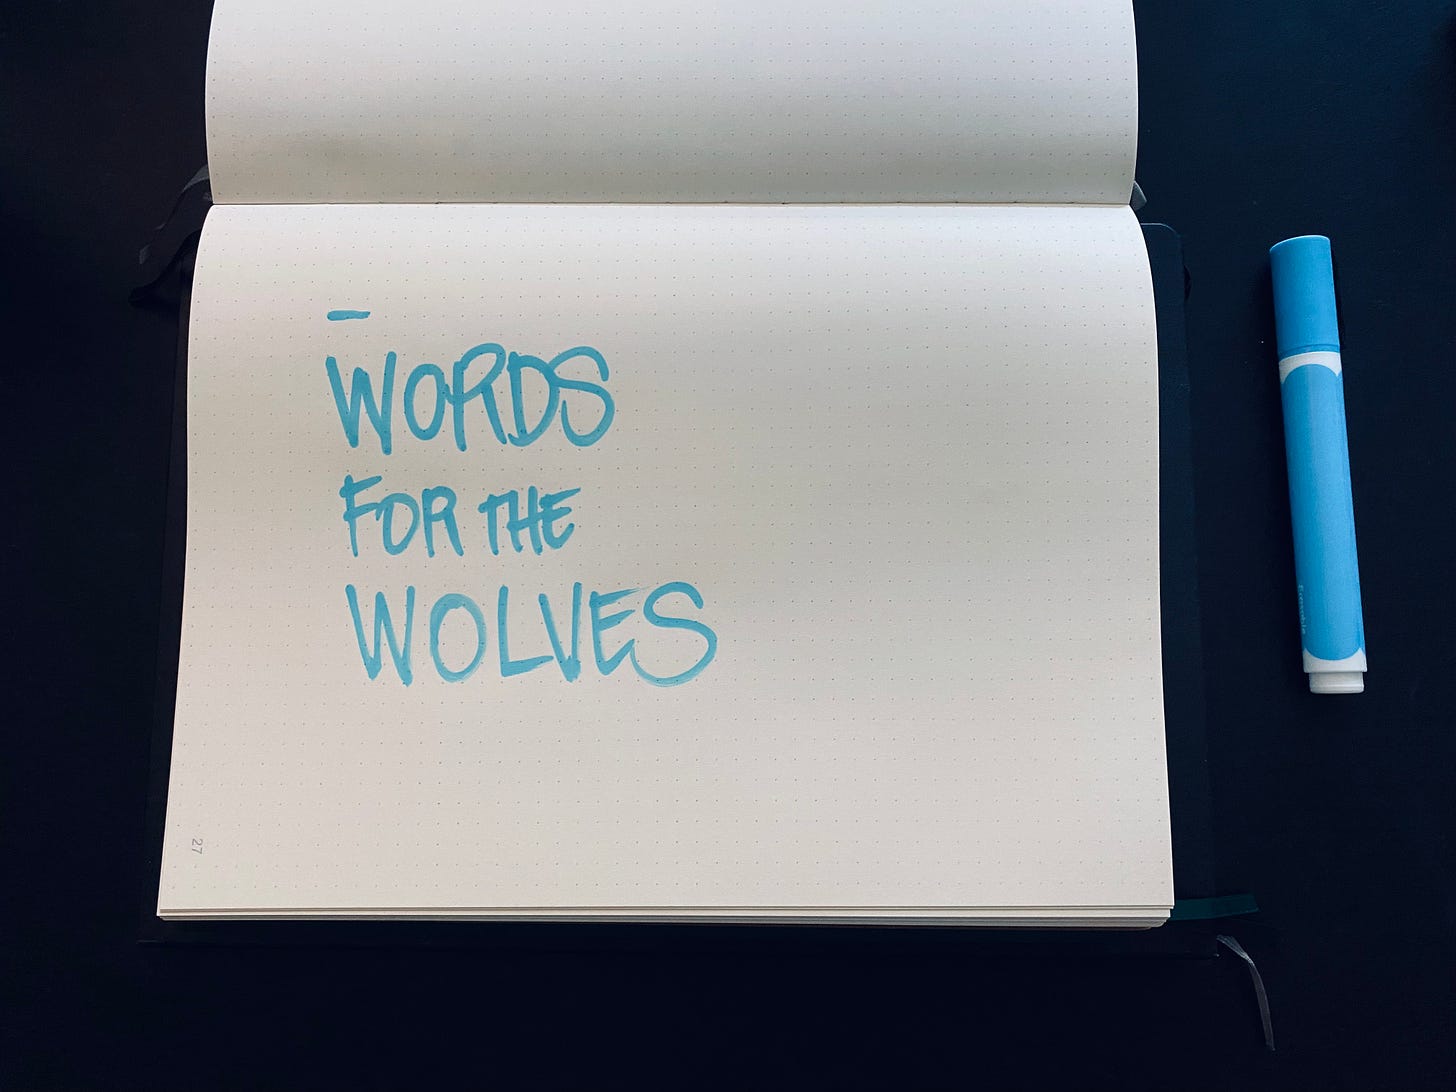 Words for the Wolves, written in a notebook with a light blue paint marker